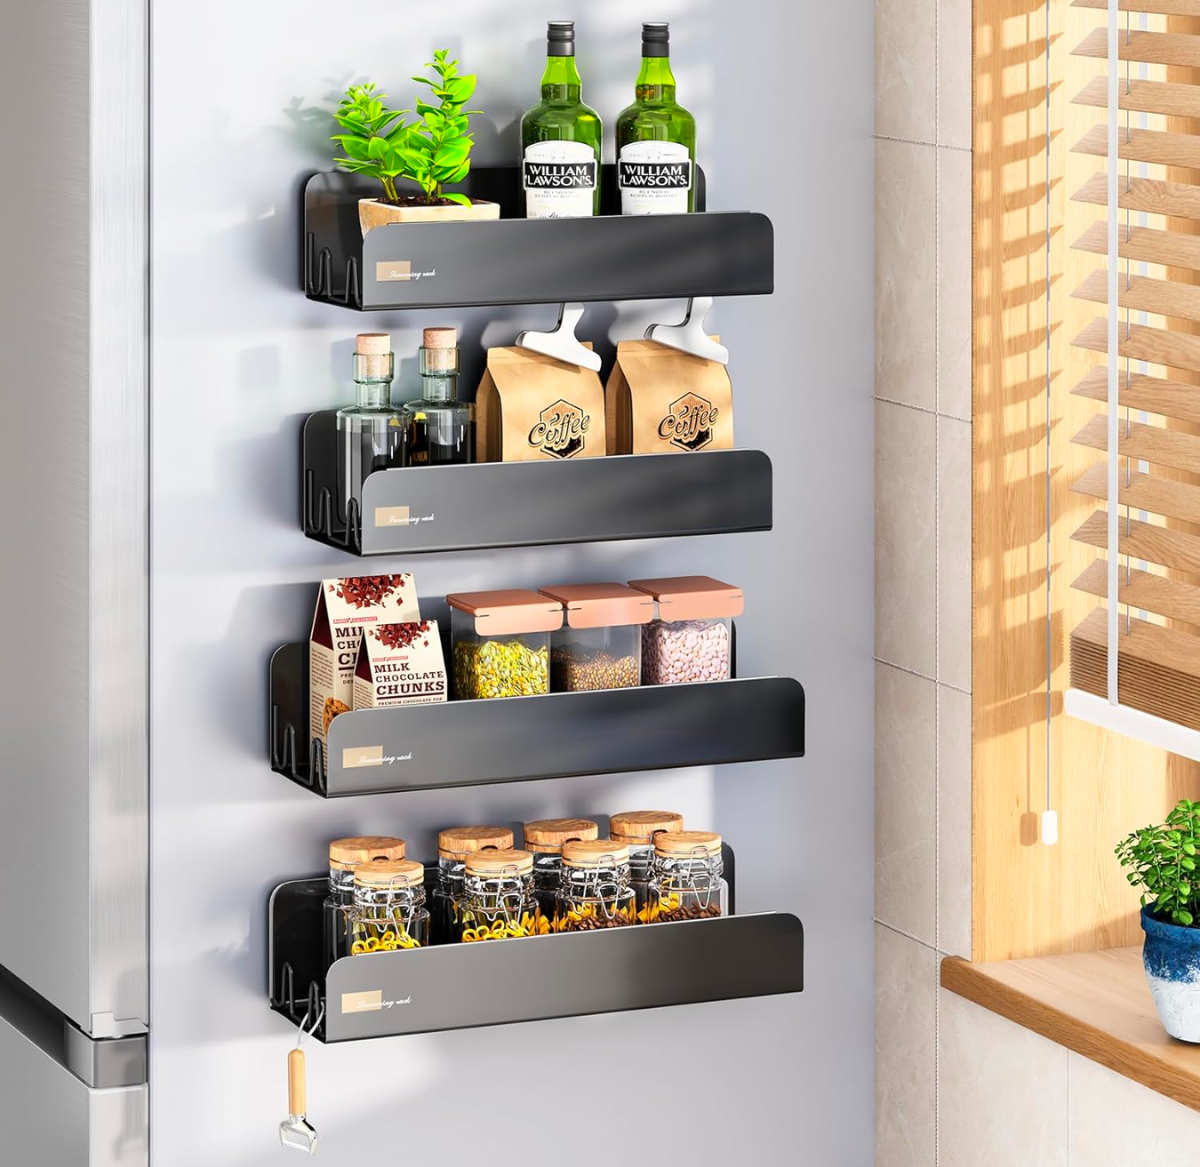 30% Off Magnetic Spice Racks on Amazon | 4-Pack Just  (Only .80 Each)